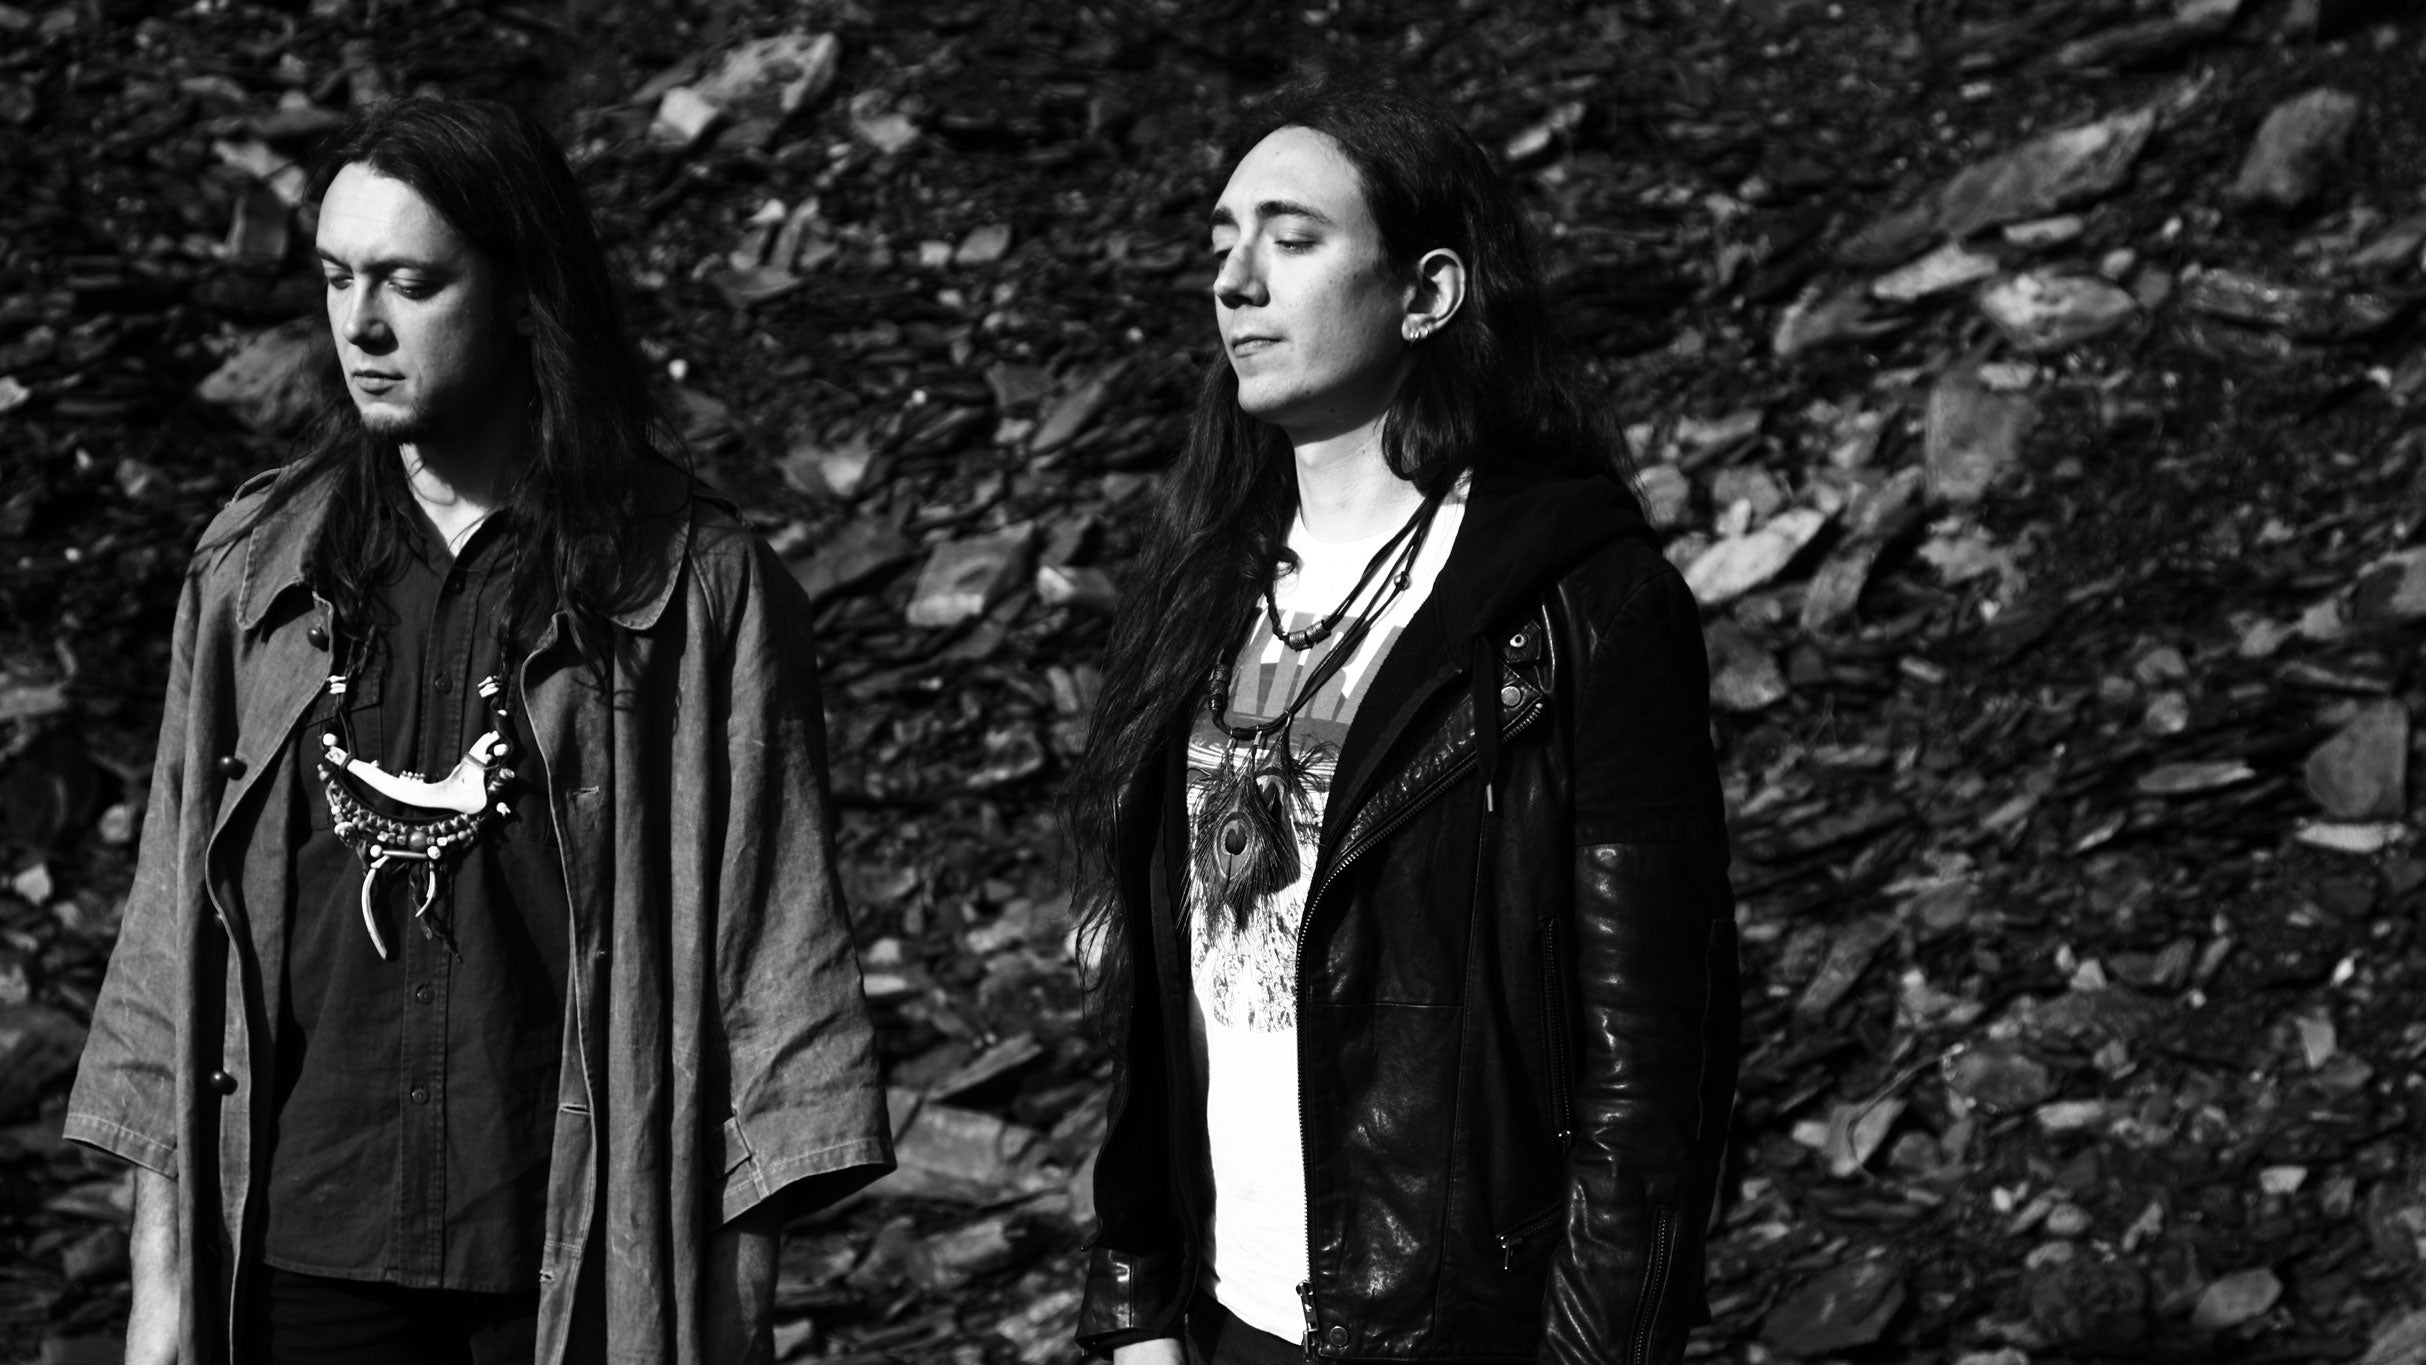 Alcest presale code for advance tickets in Manchester